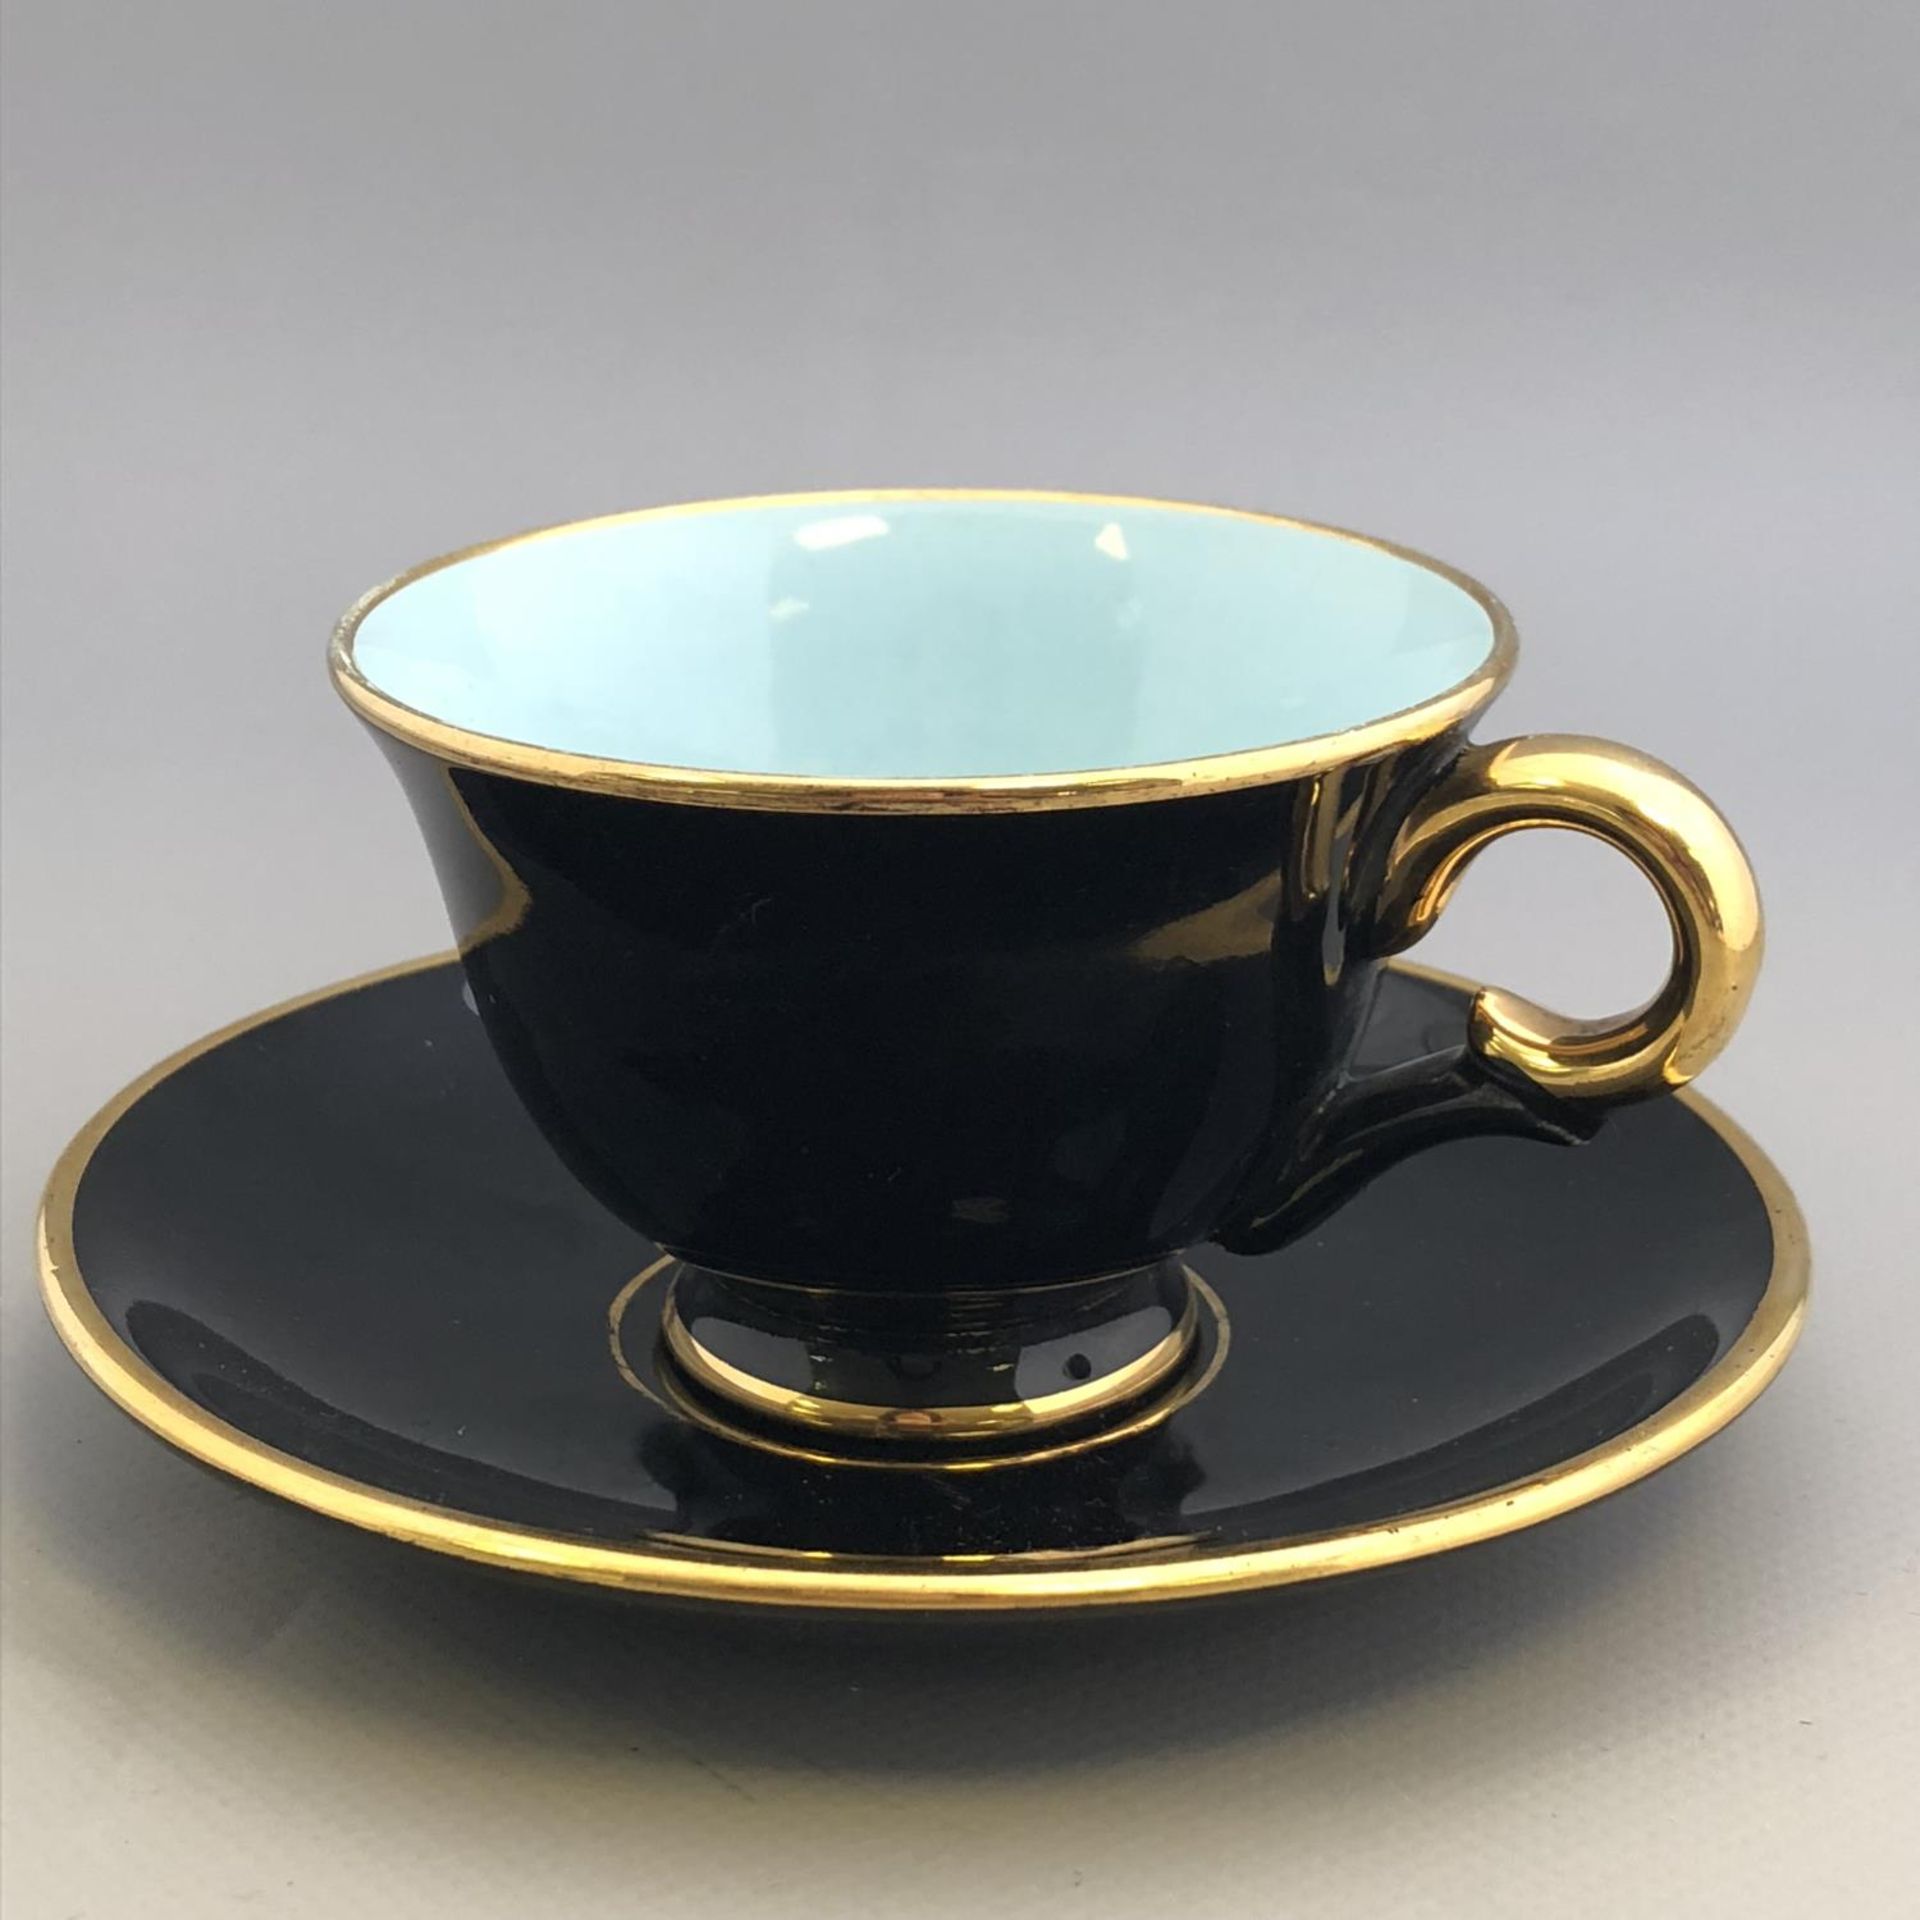 Black & Gilt Porcelain Coffee Cup with Blue Interior - Stavangerflint - Norway - Image 2 of 3